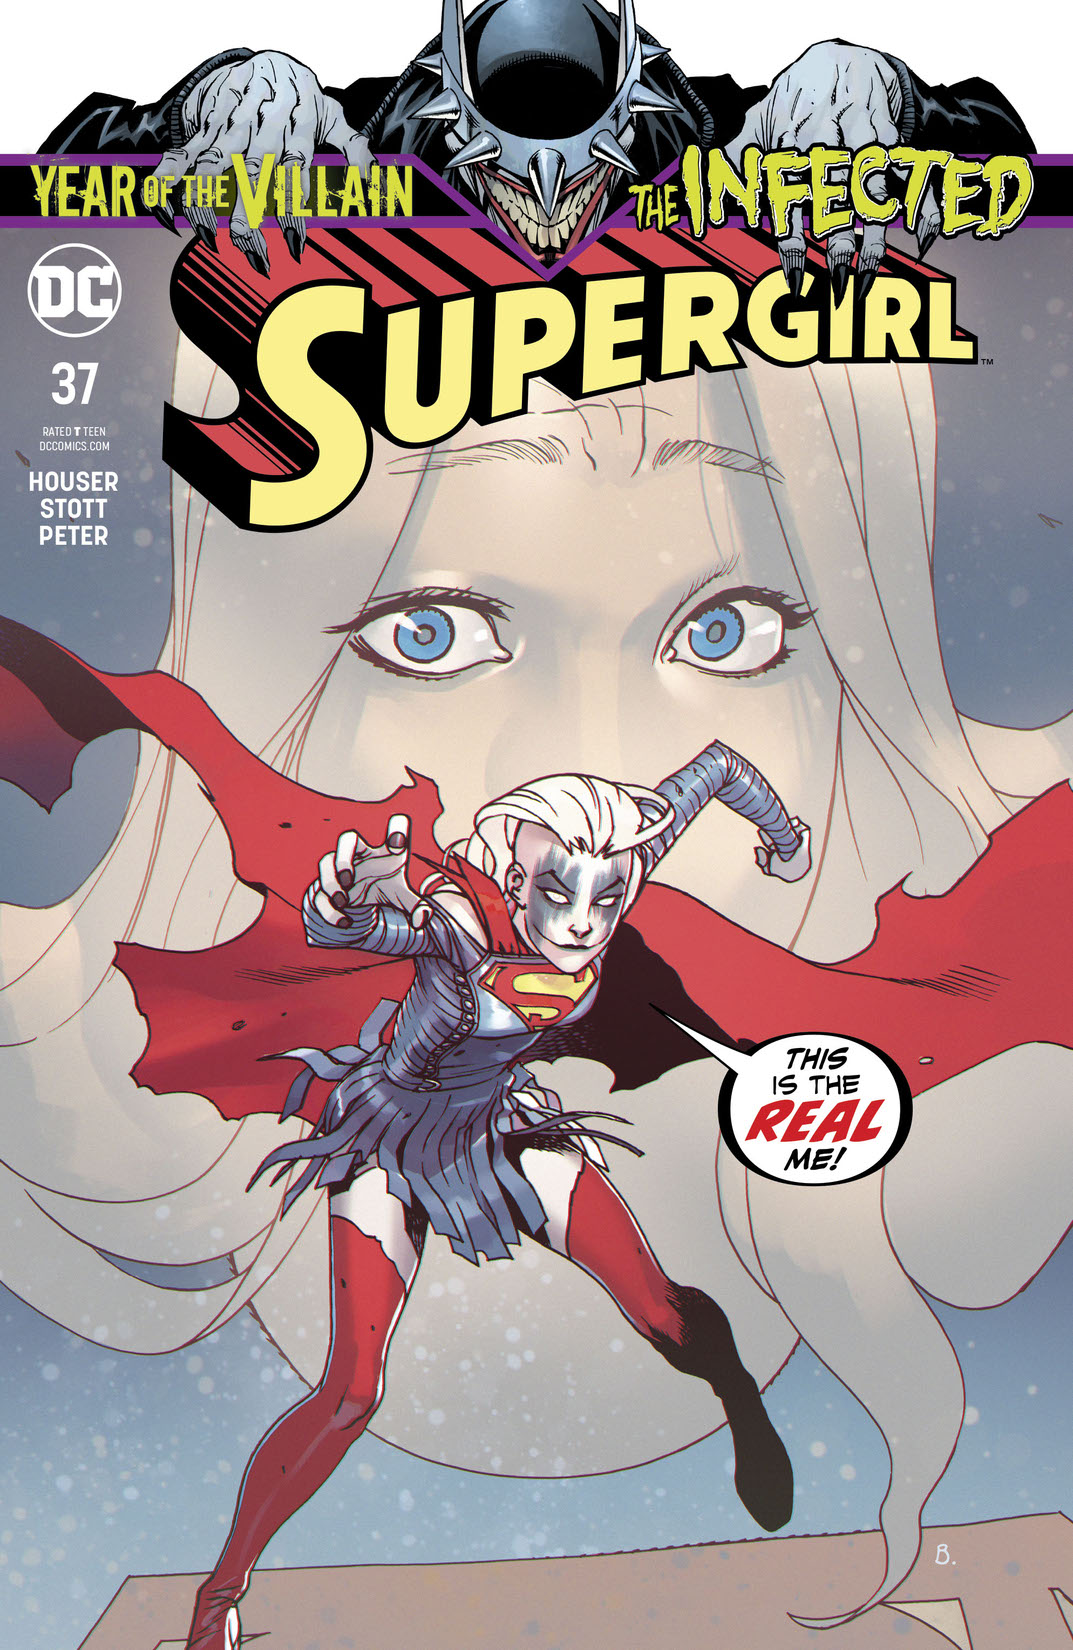 Supergirl (2016-) #37 preview images